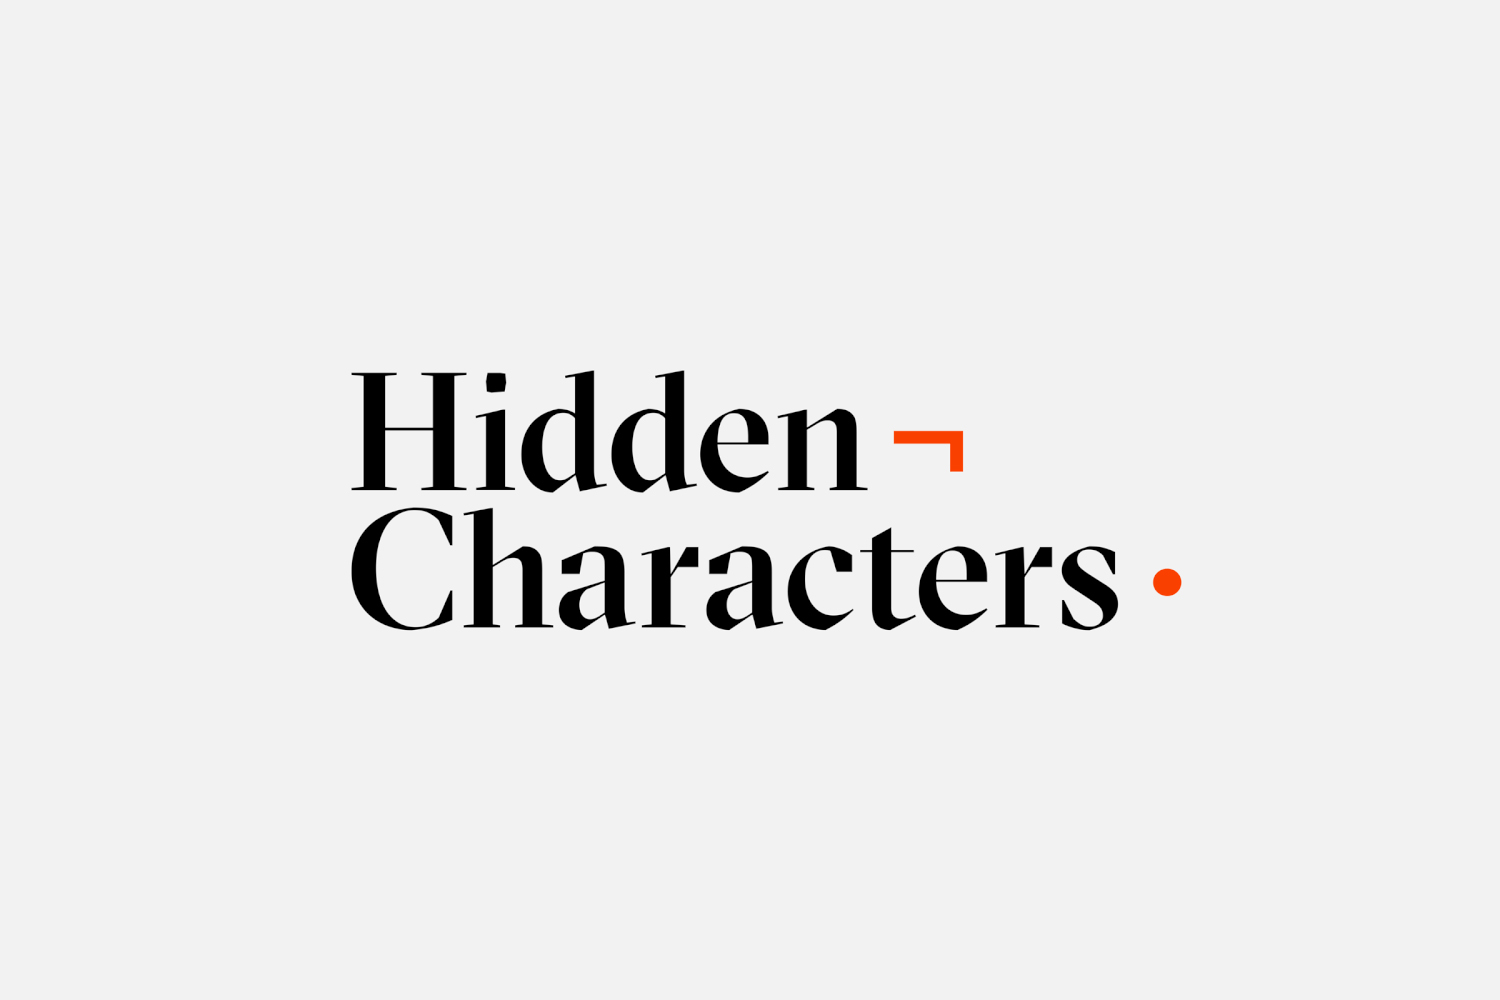 Creative Logotype Gallery & Inspiration: Hidden Characters by RE, Australia